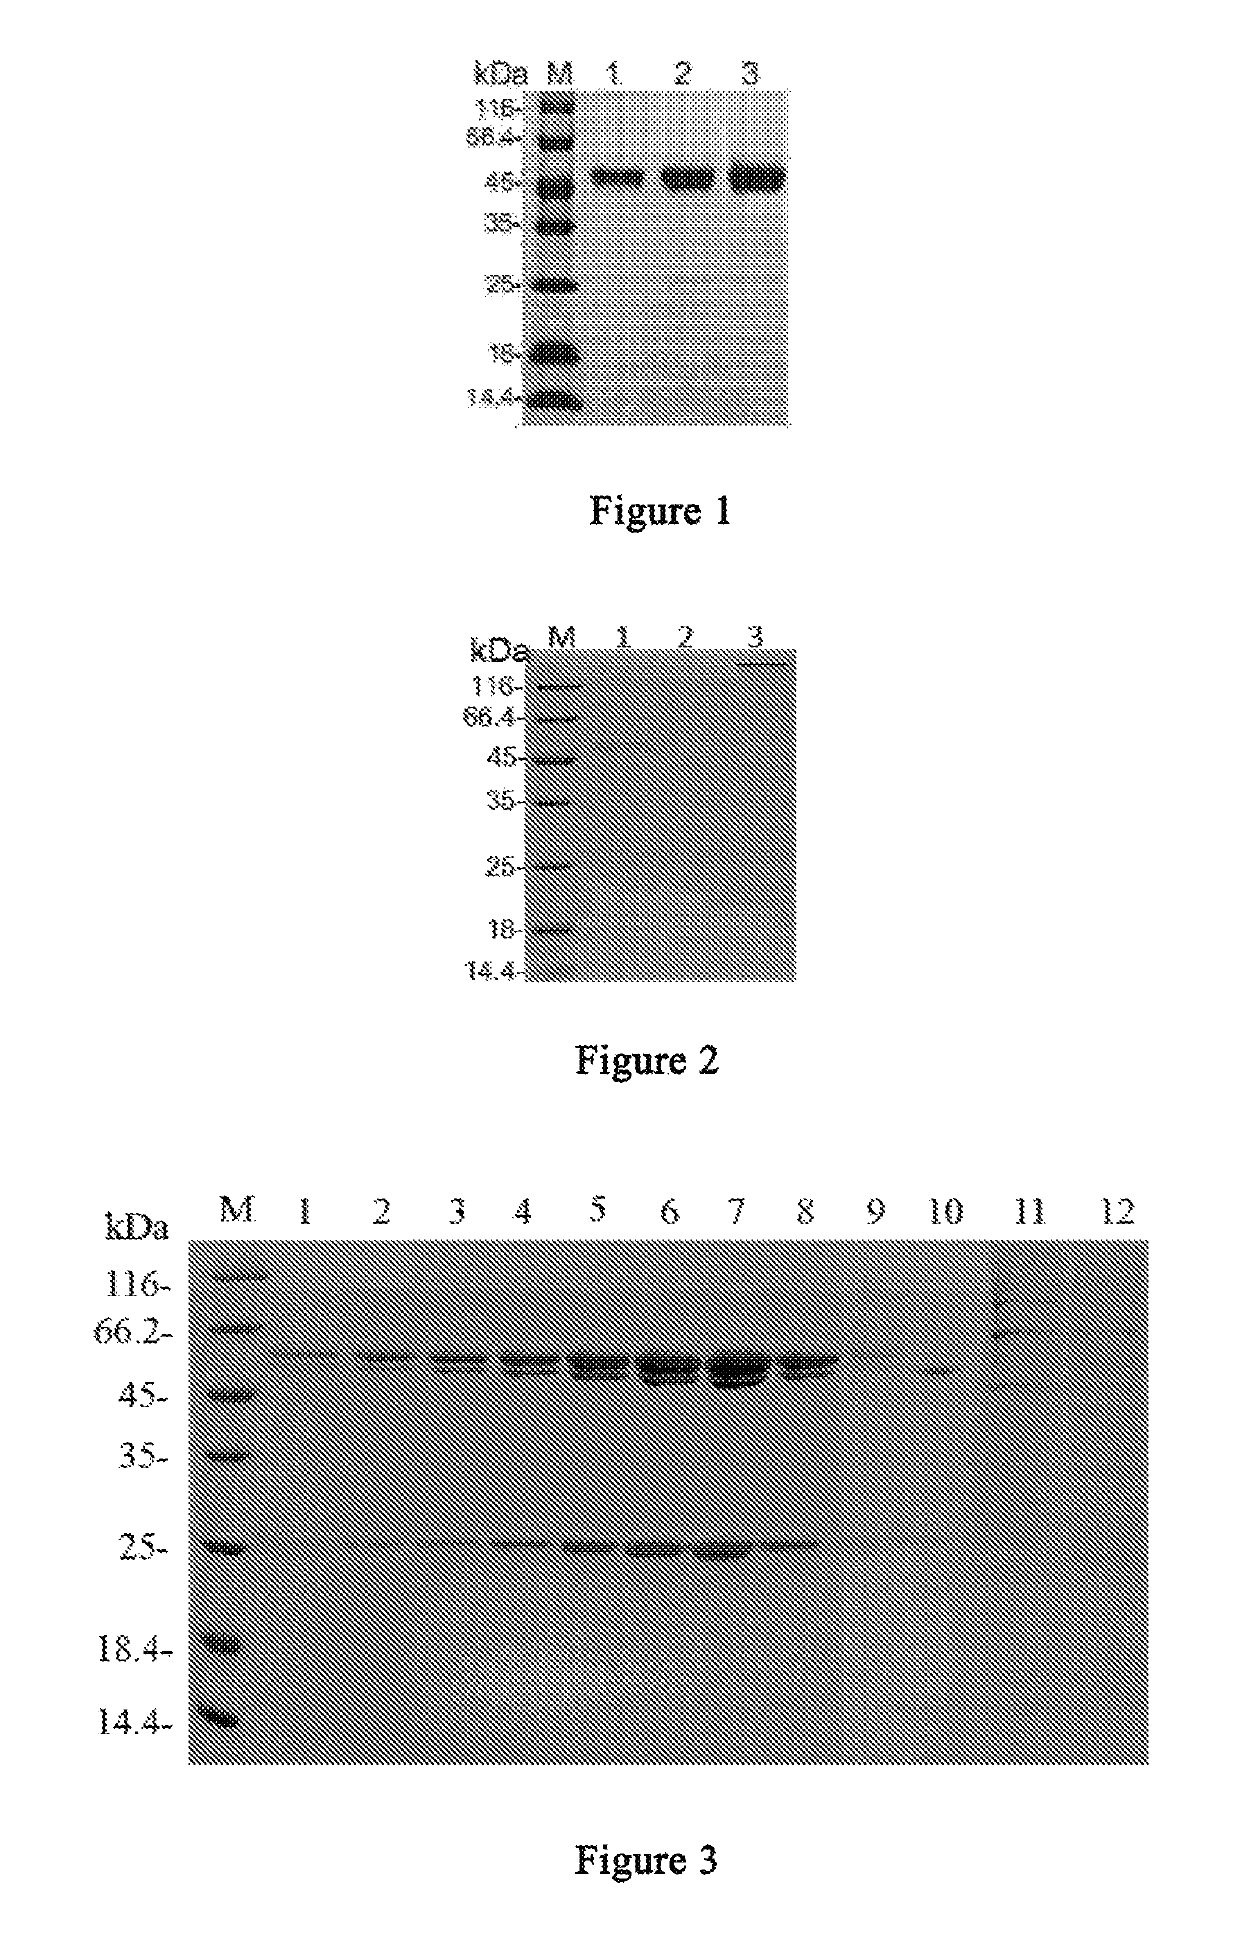 Anti-CTLA4 monoclonal antibody or its antigen binding fragments, pharmaceutical compositions and uses